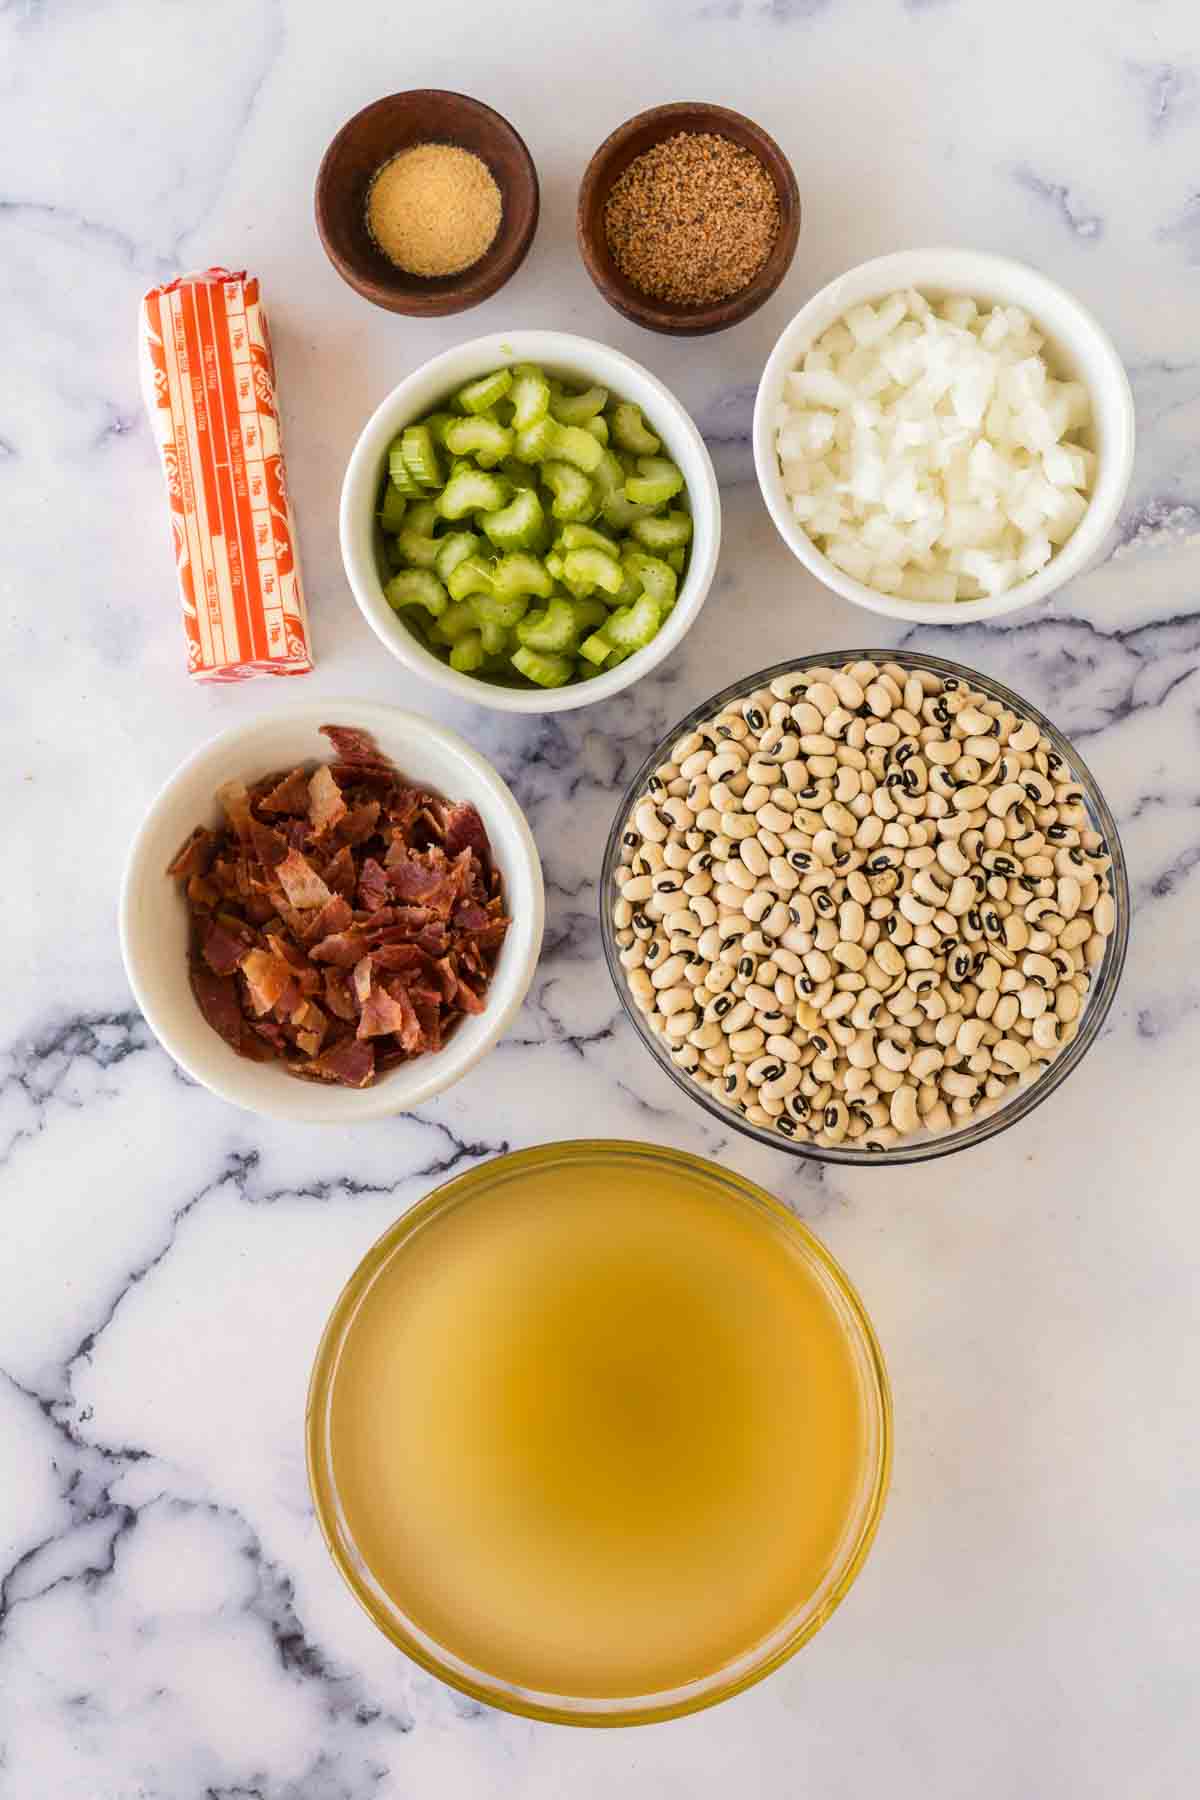 top view of portioned dishes with raw ingredients of black eyed peas